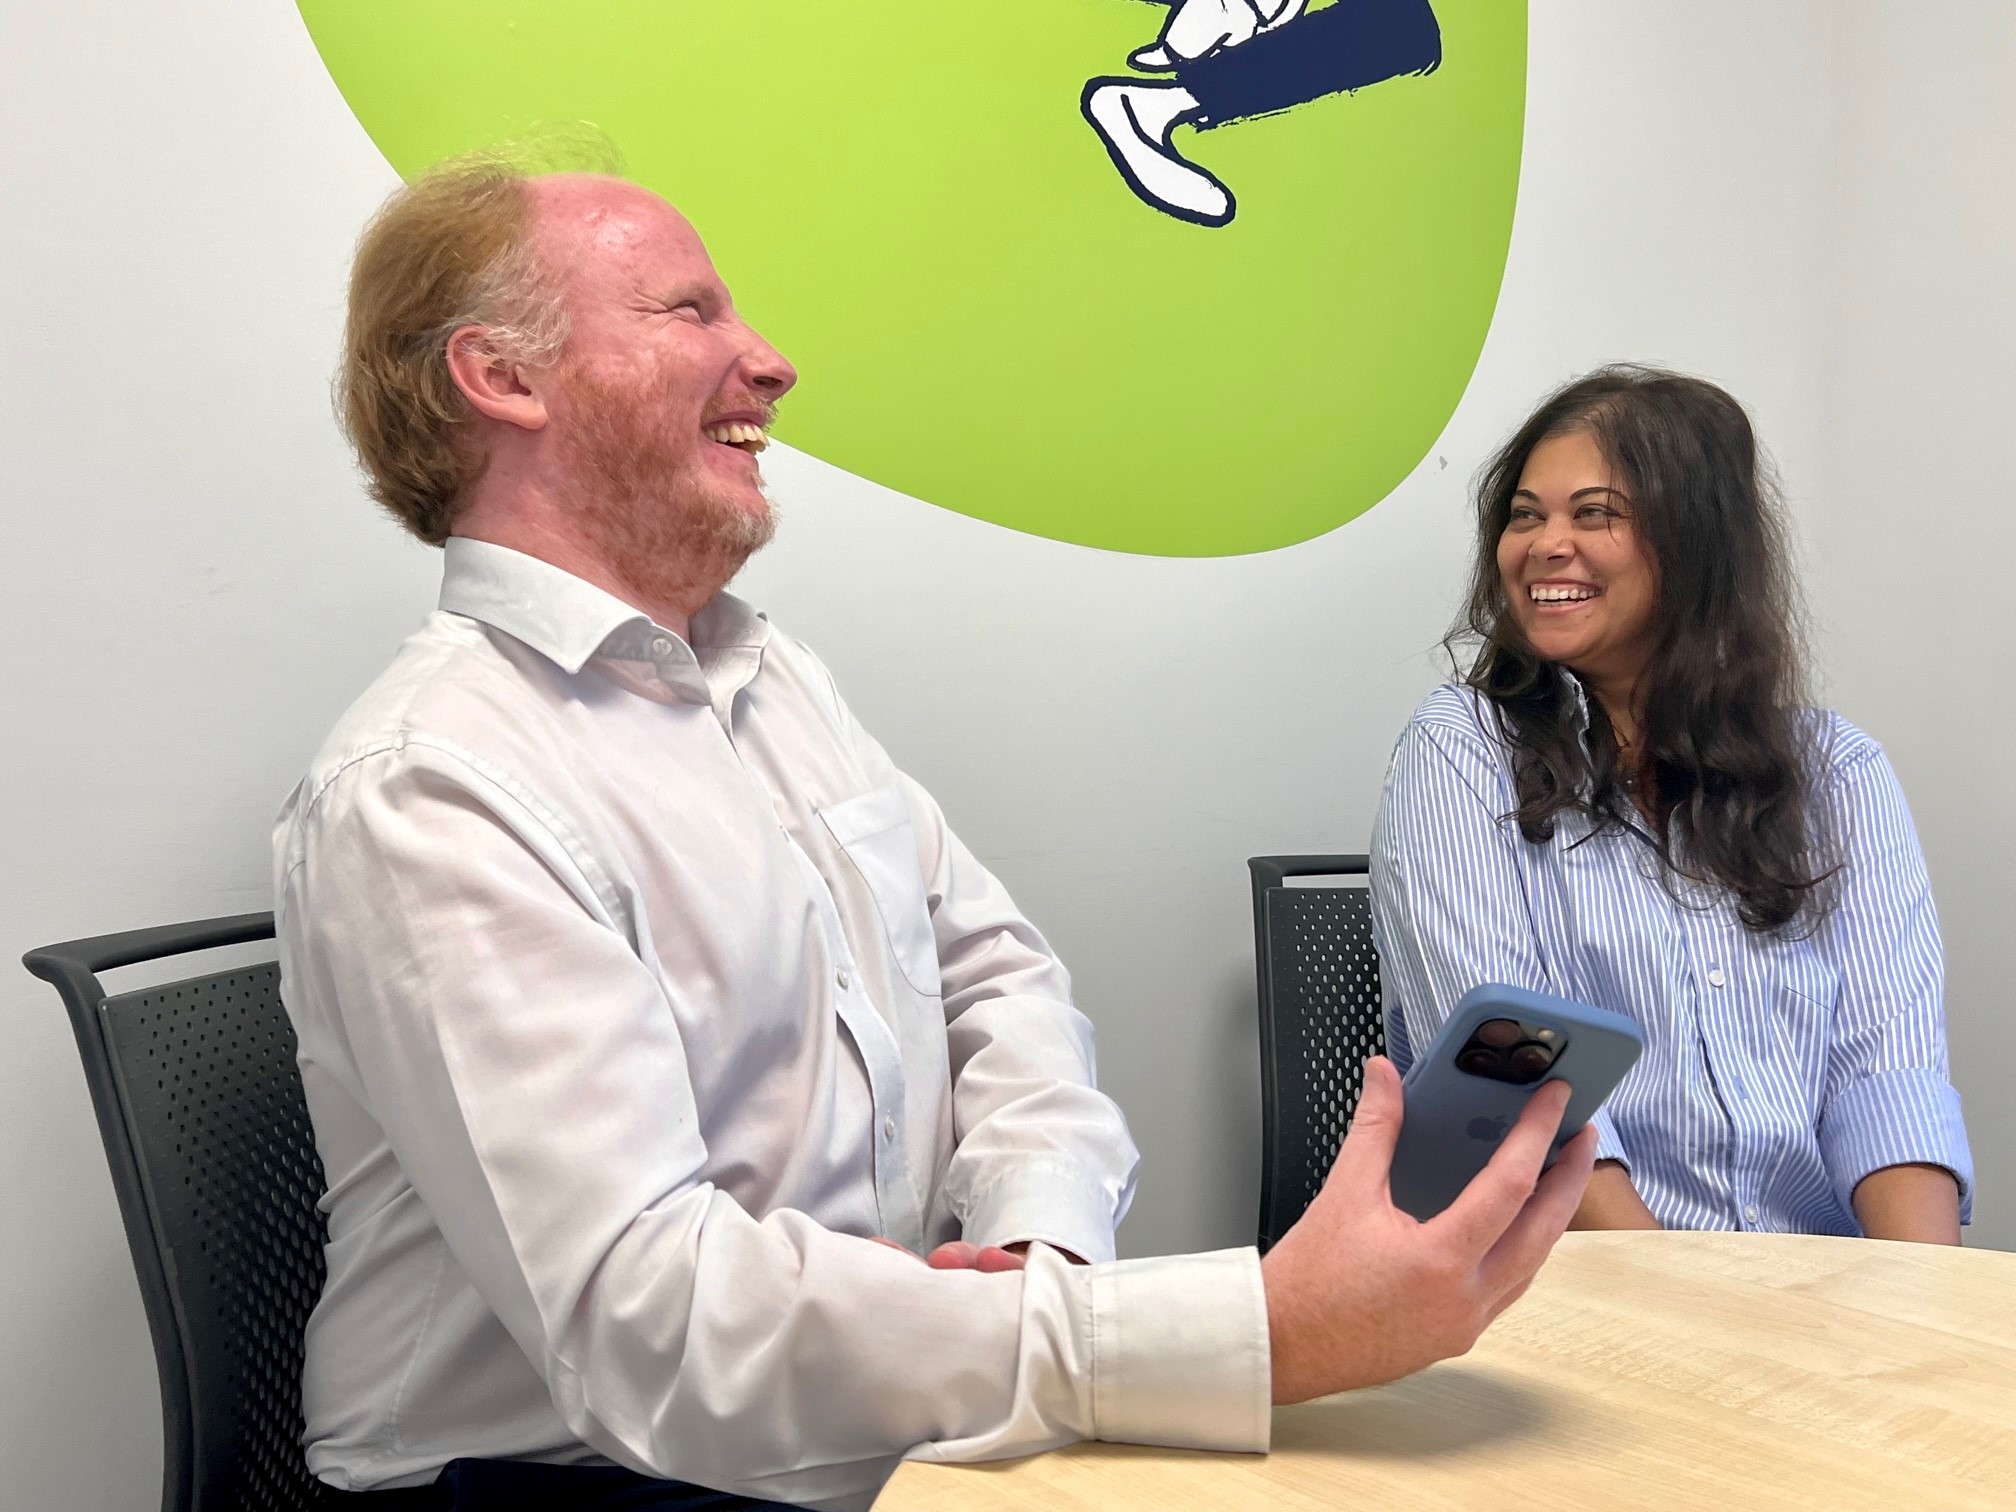 Darren and Pooja, who are sat together at a table, are laughing as they sharing a joke. Darren, who has sight loss, is holding an iPhone.